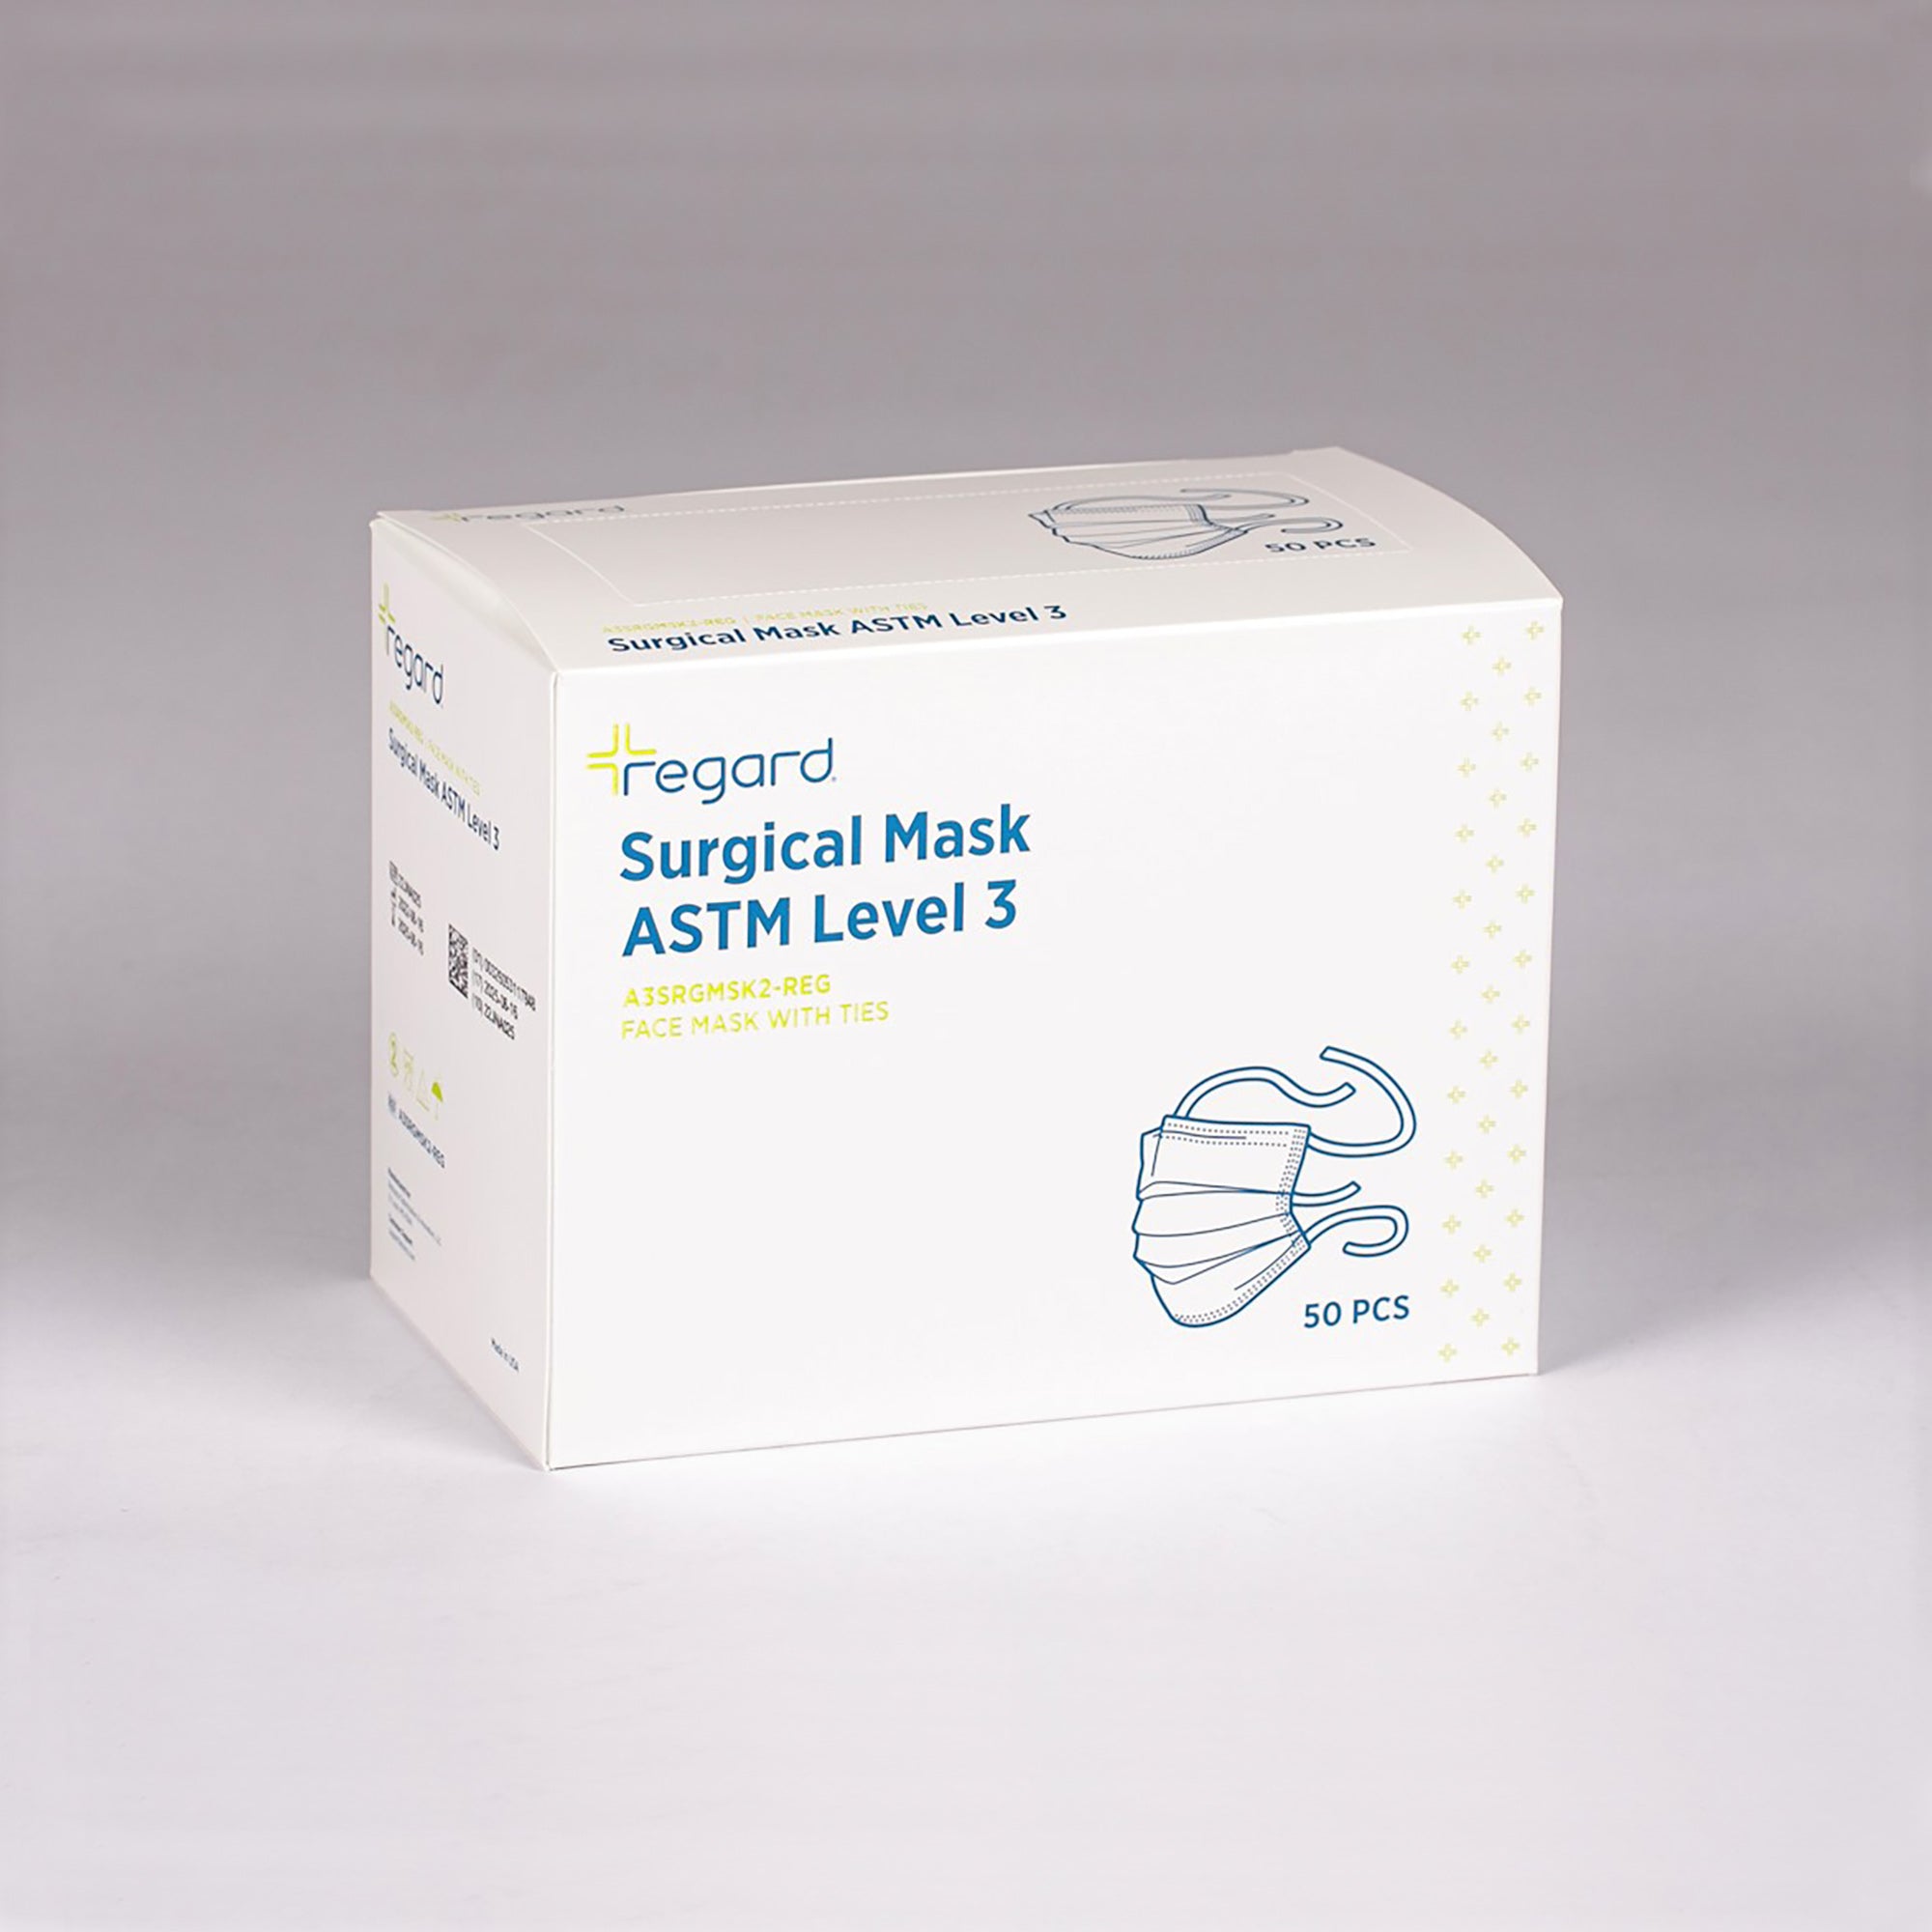 Surgical Mask, ASTM Level 3, Tie - Regard (Box of 50)